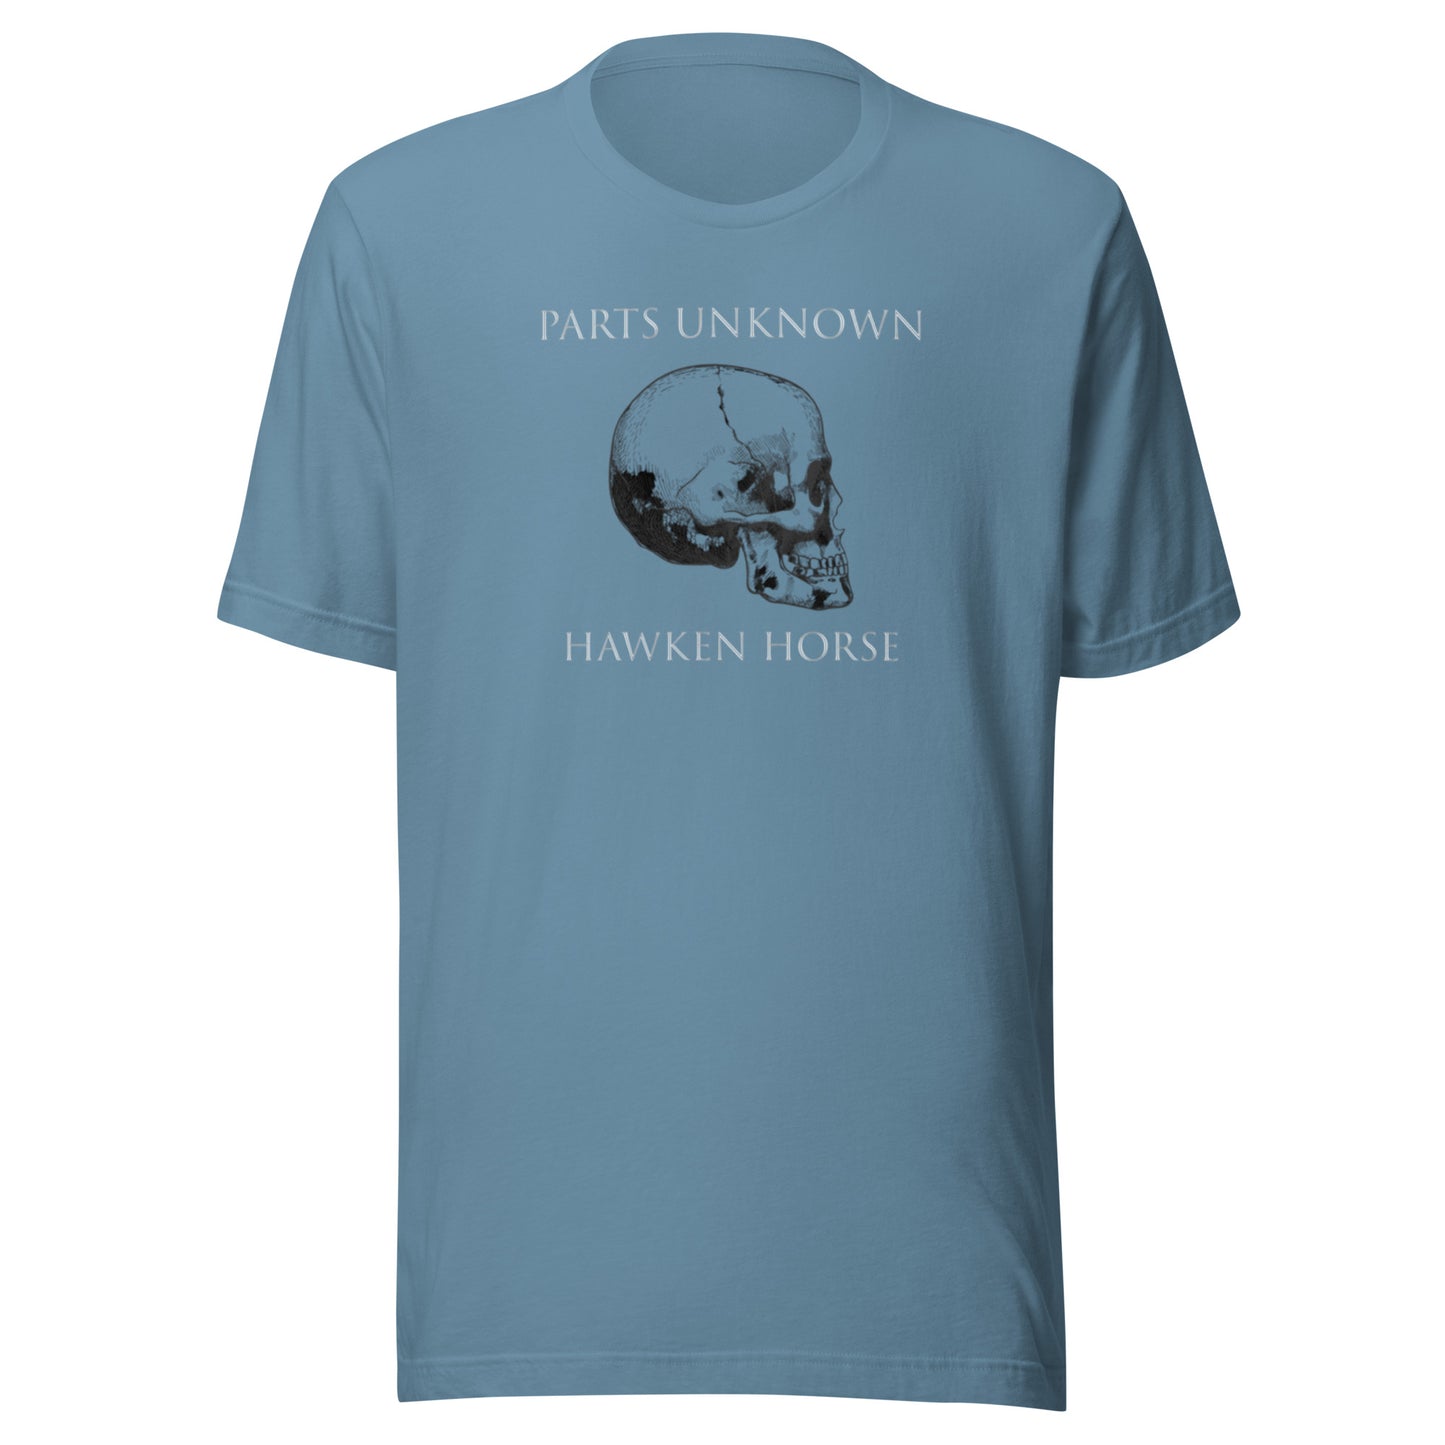 Parts Unknown t-shirt